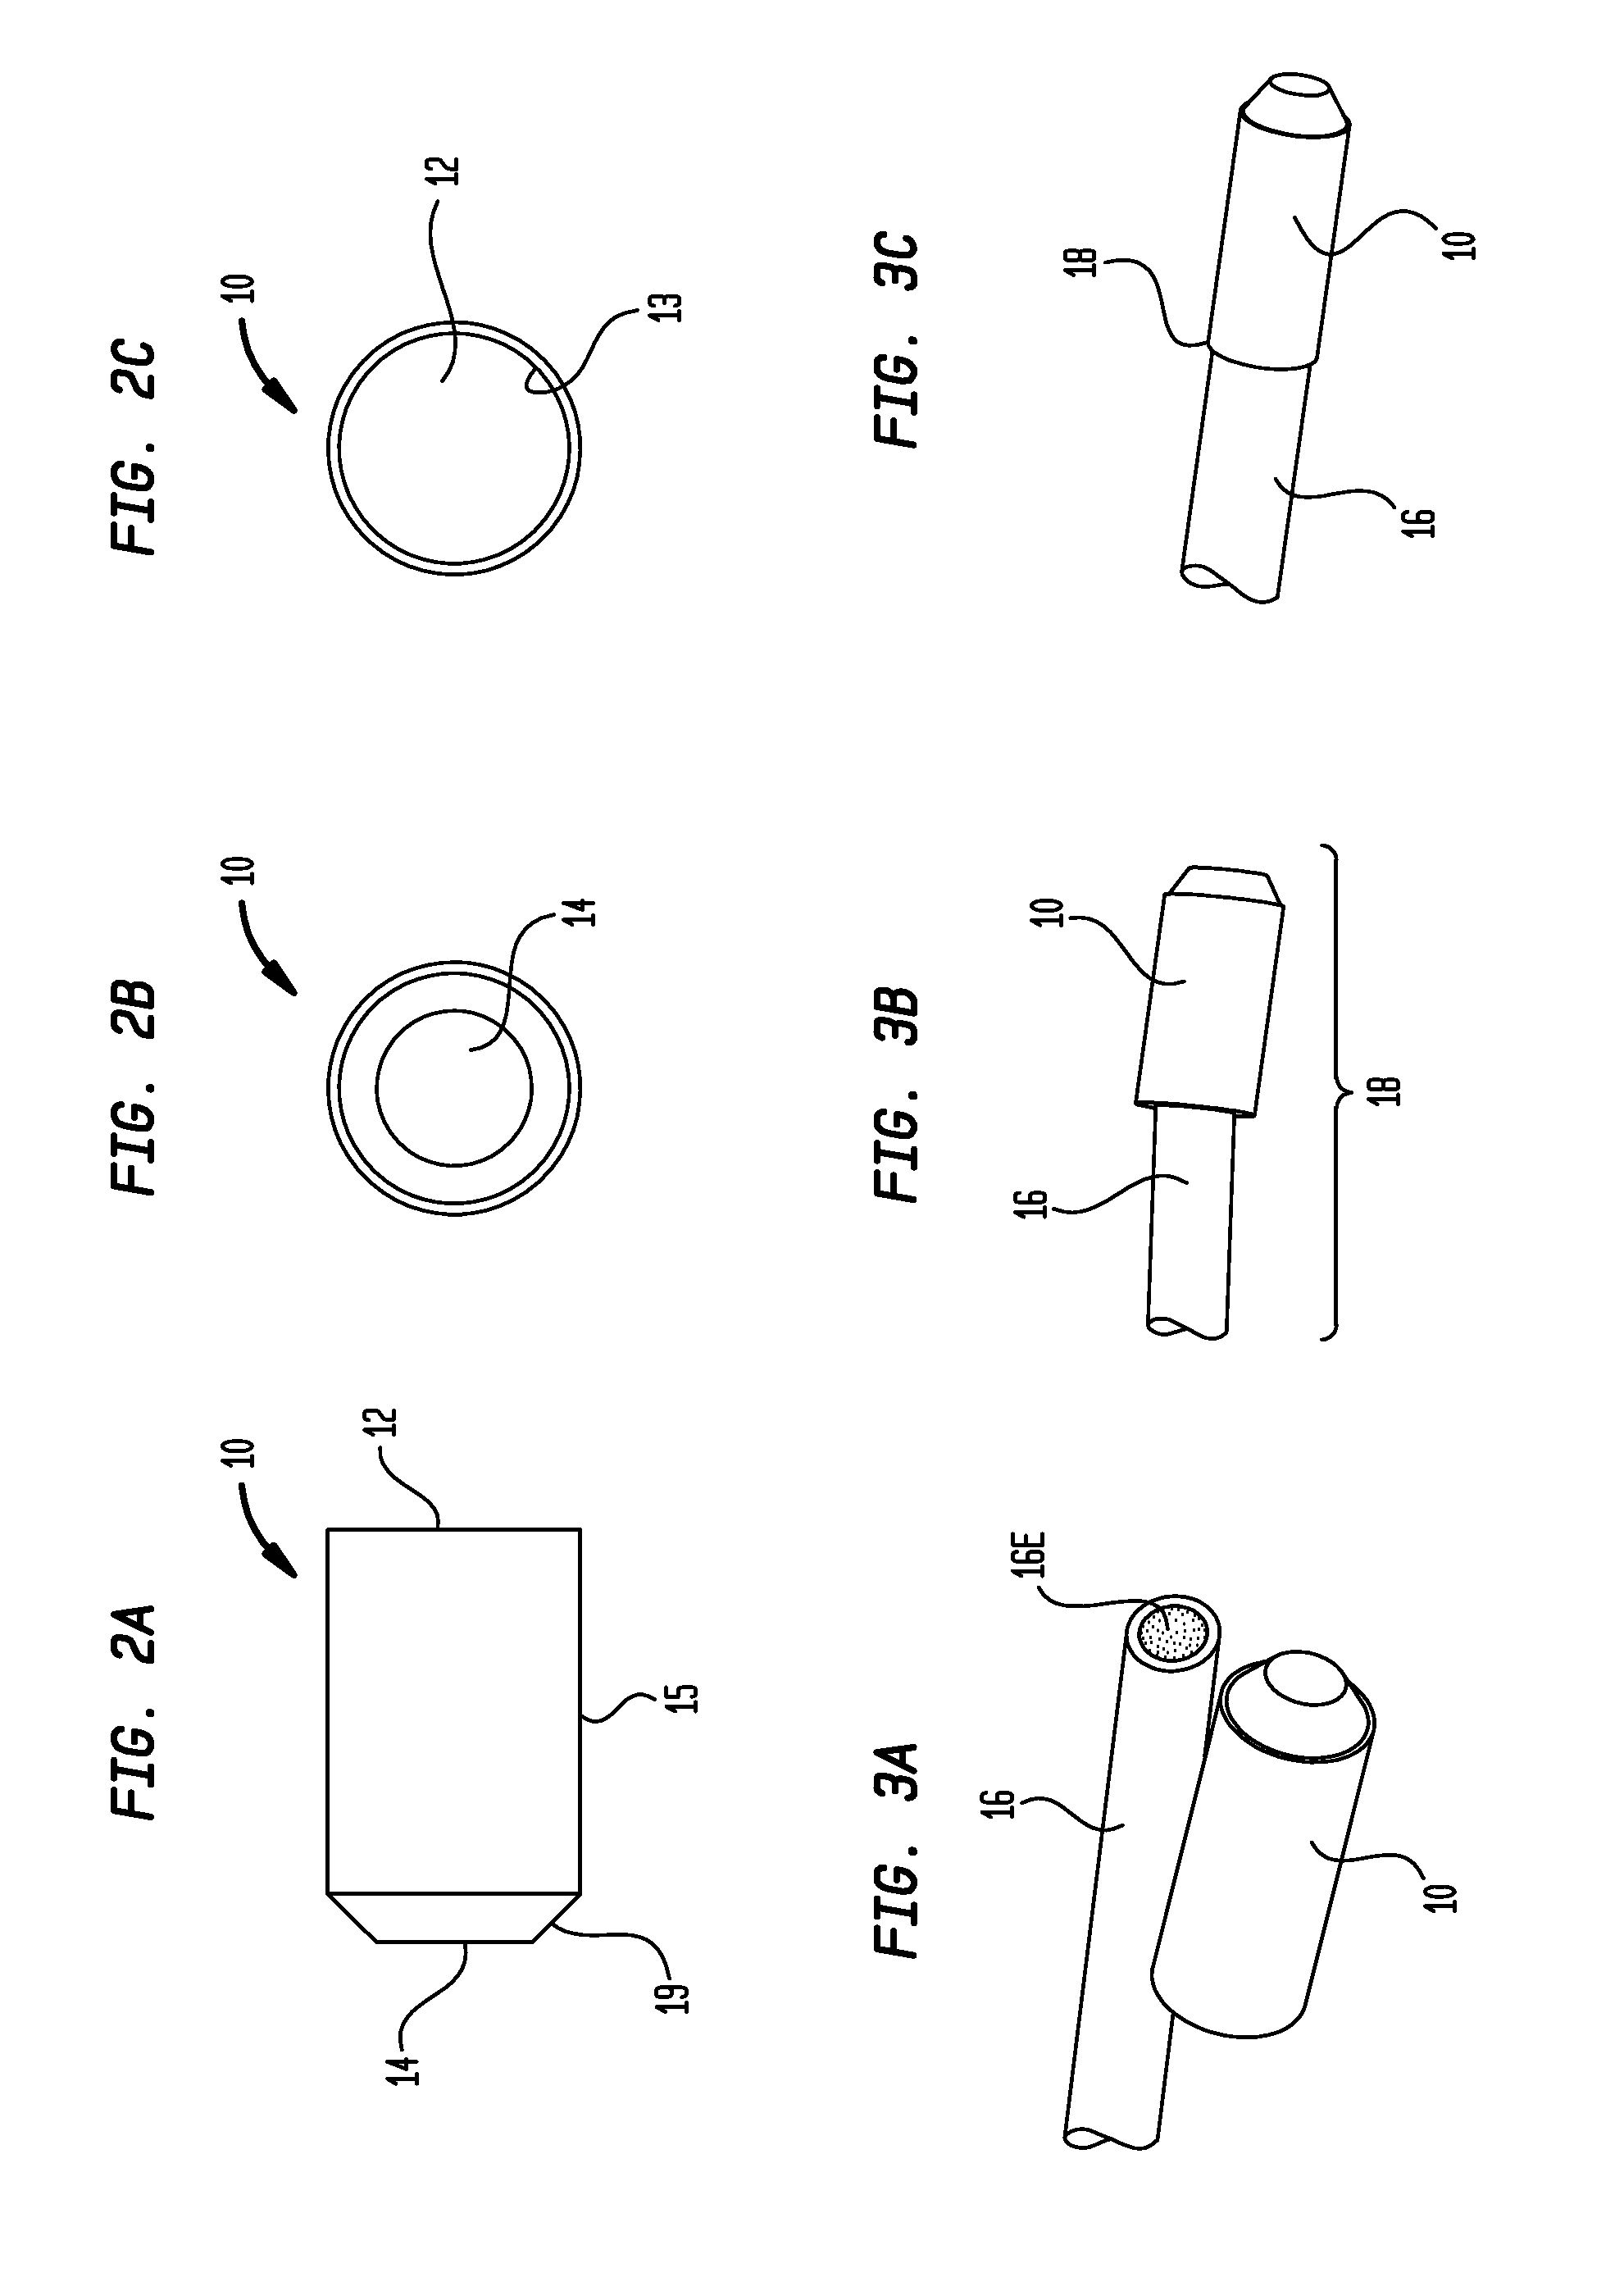 Systems and Methods for Protecting a Cut End of an Electrical Conductor